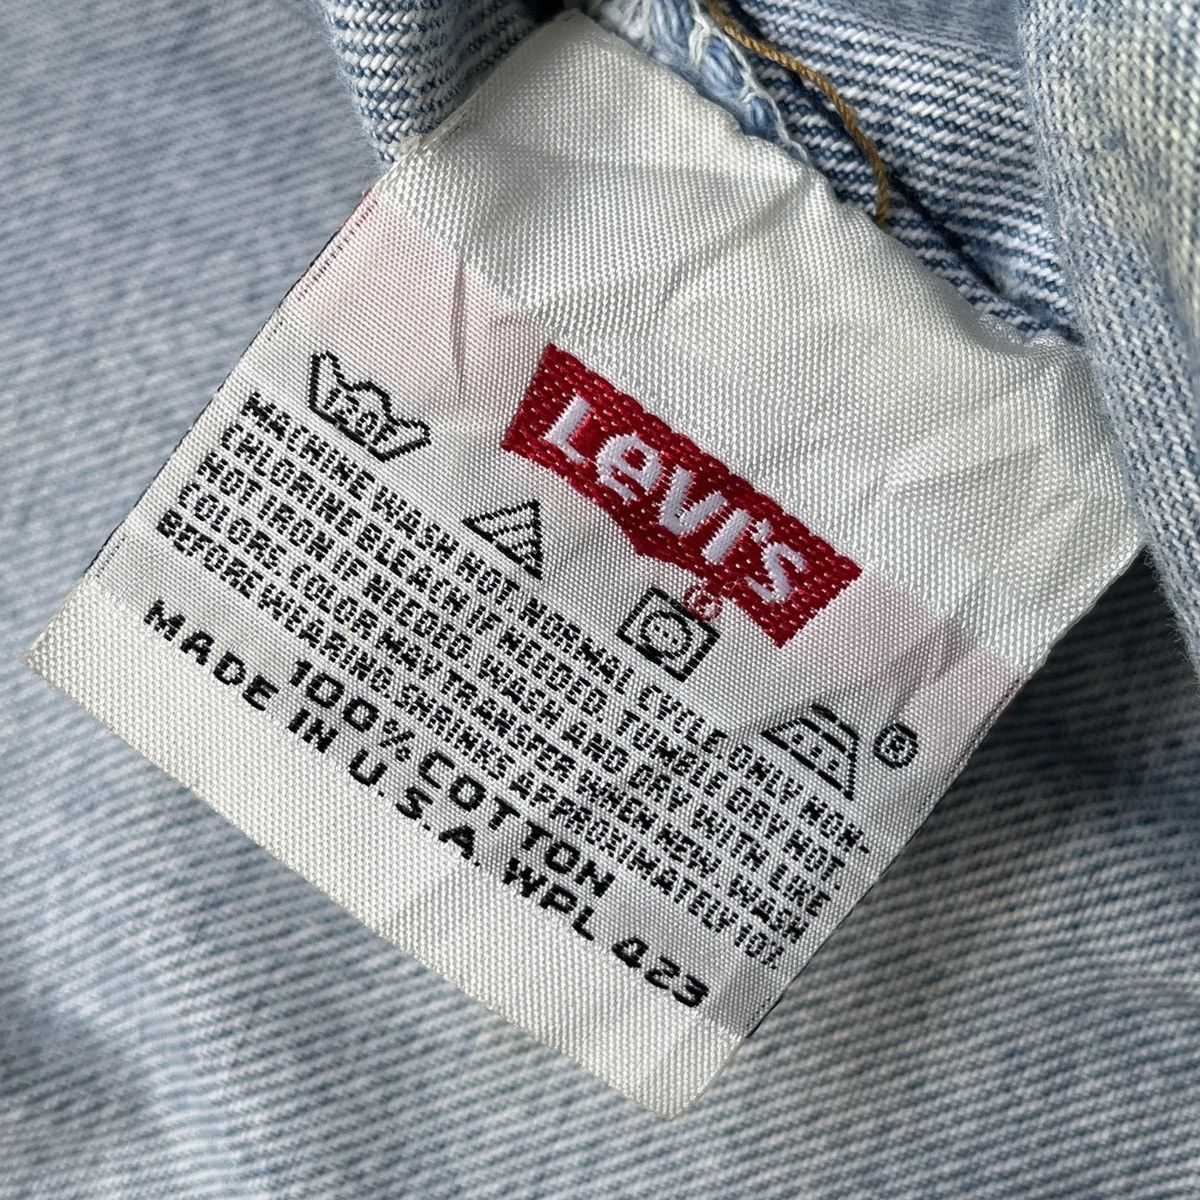 Ripped Levis 501 Vintage 1993 Straight Cut Made In USA - 12